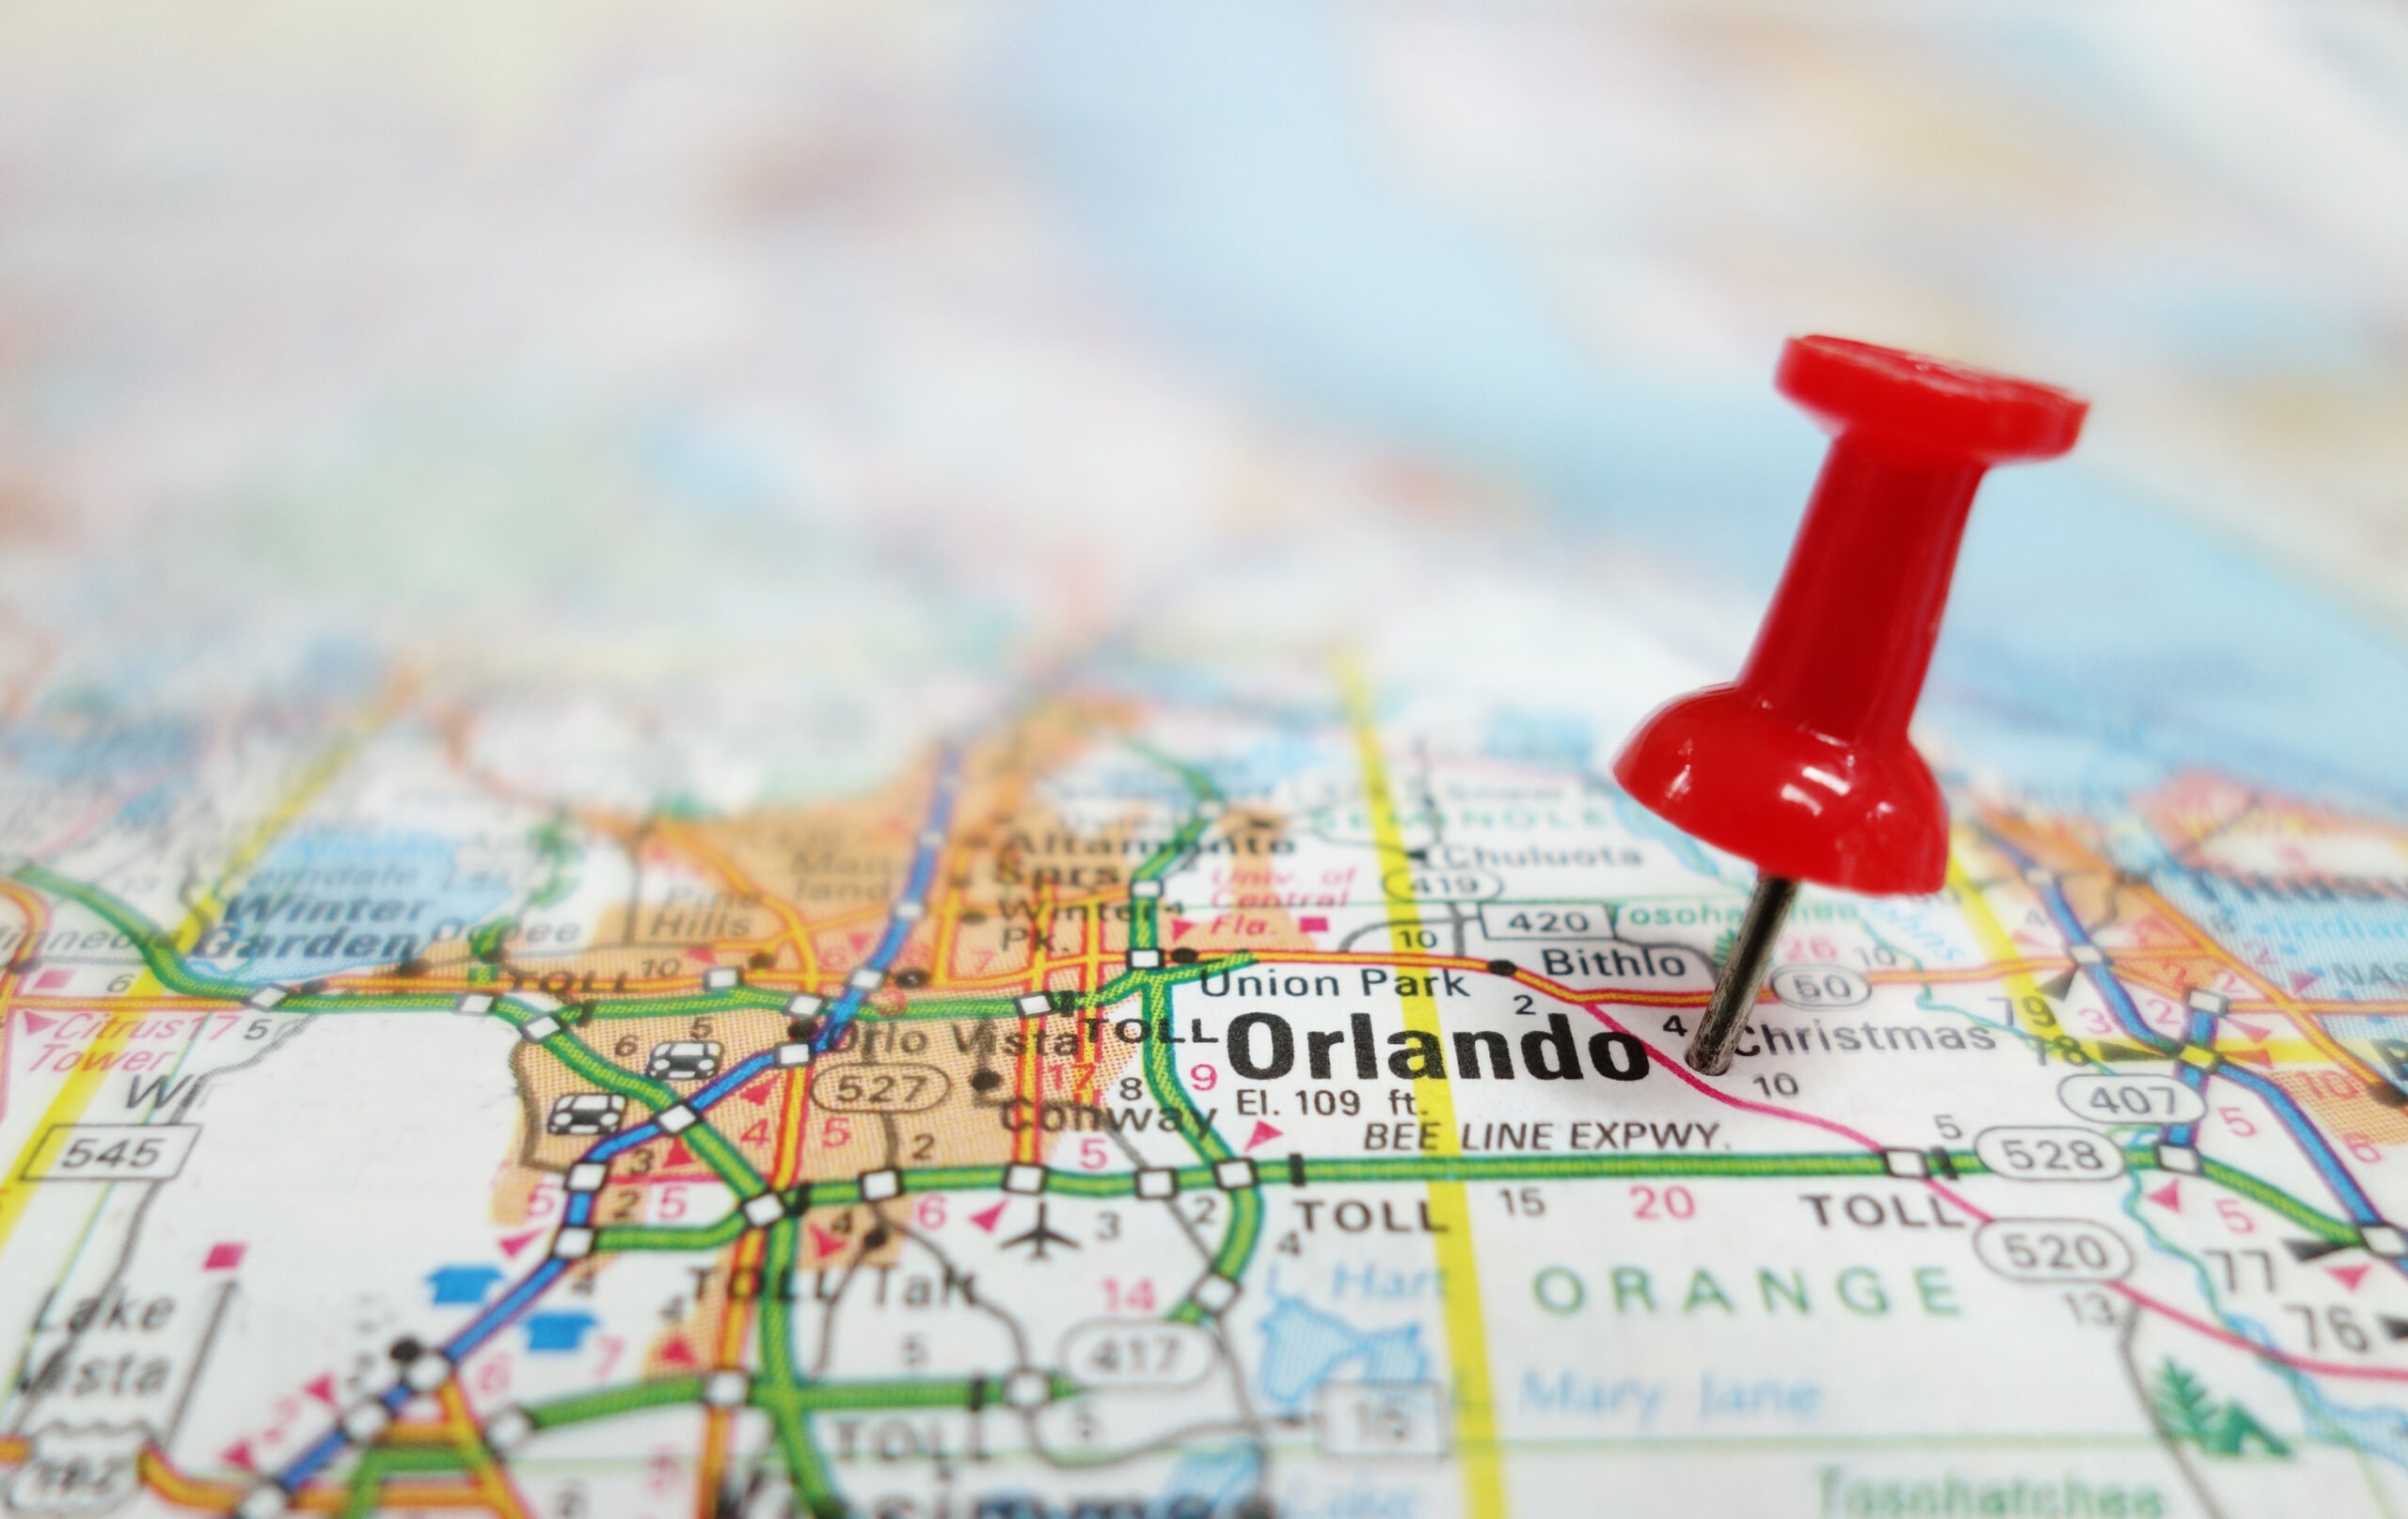 Orlando makes meeting planners' maps